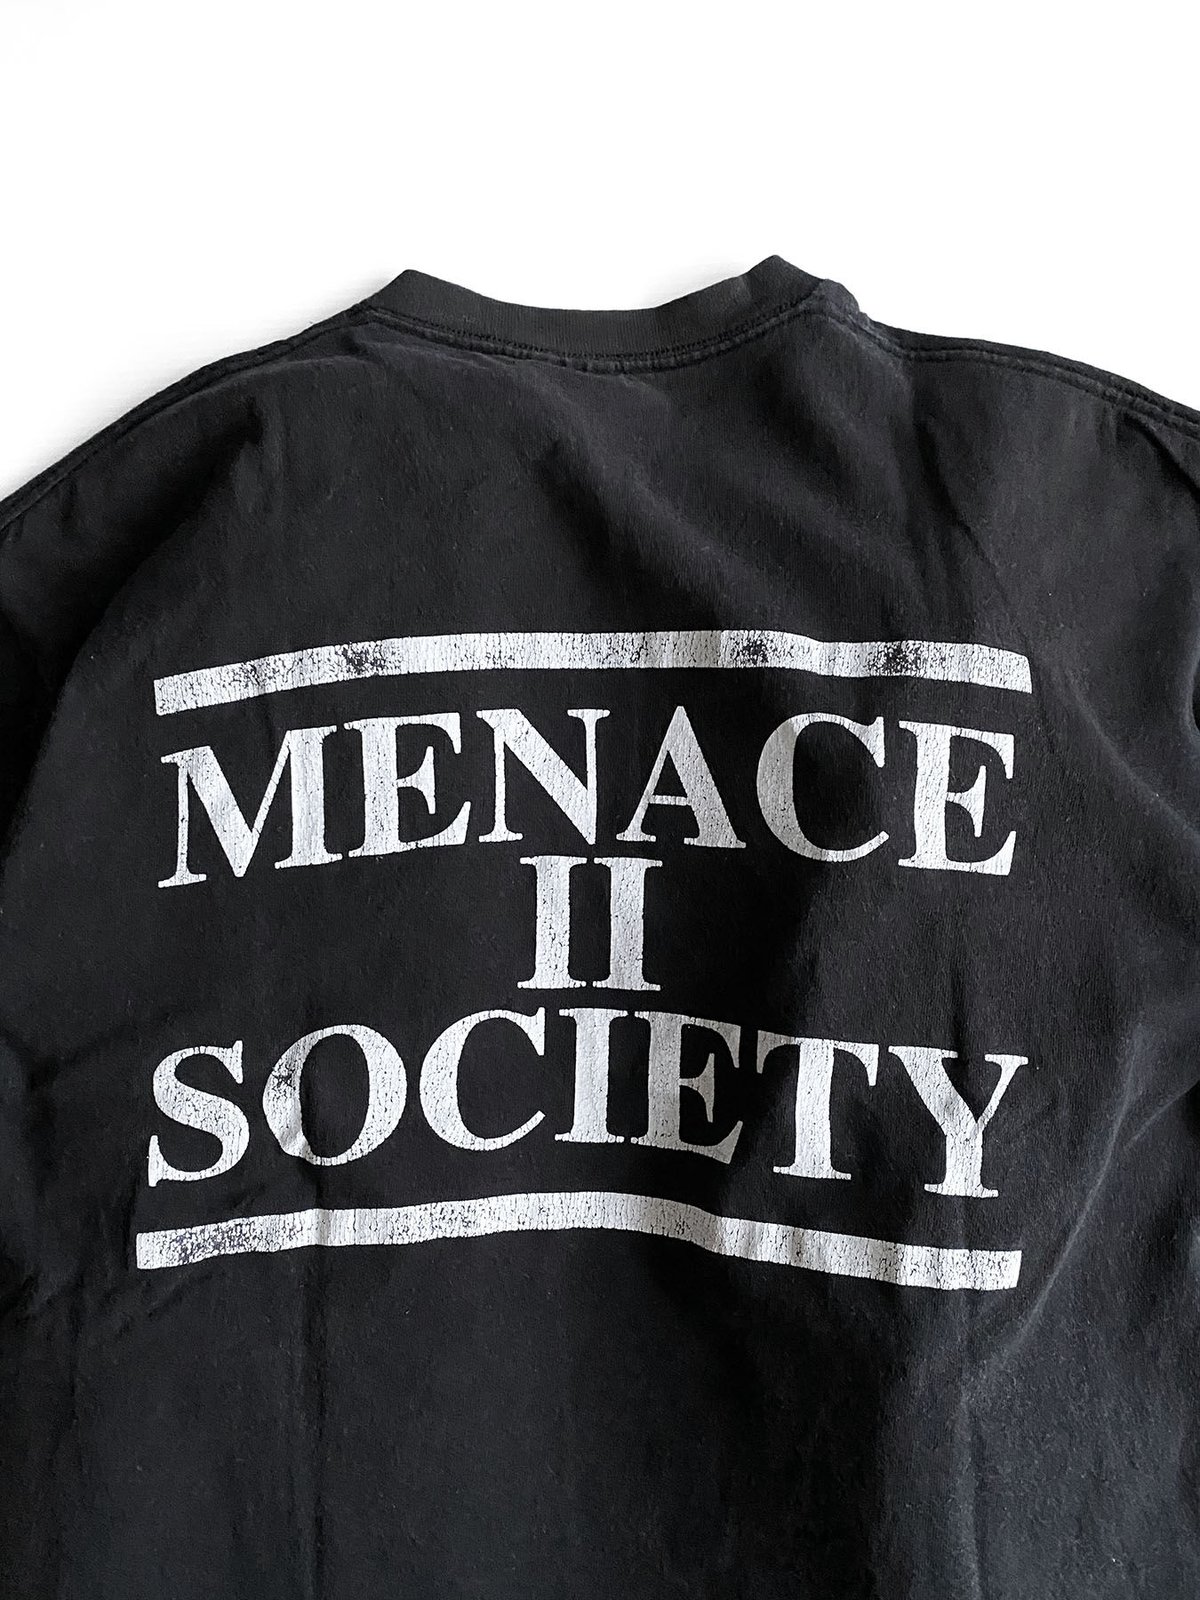 MENACE Ⅱ SOCIETY Tee by Supreme